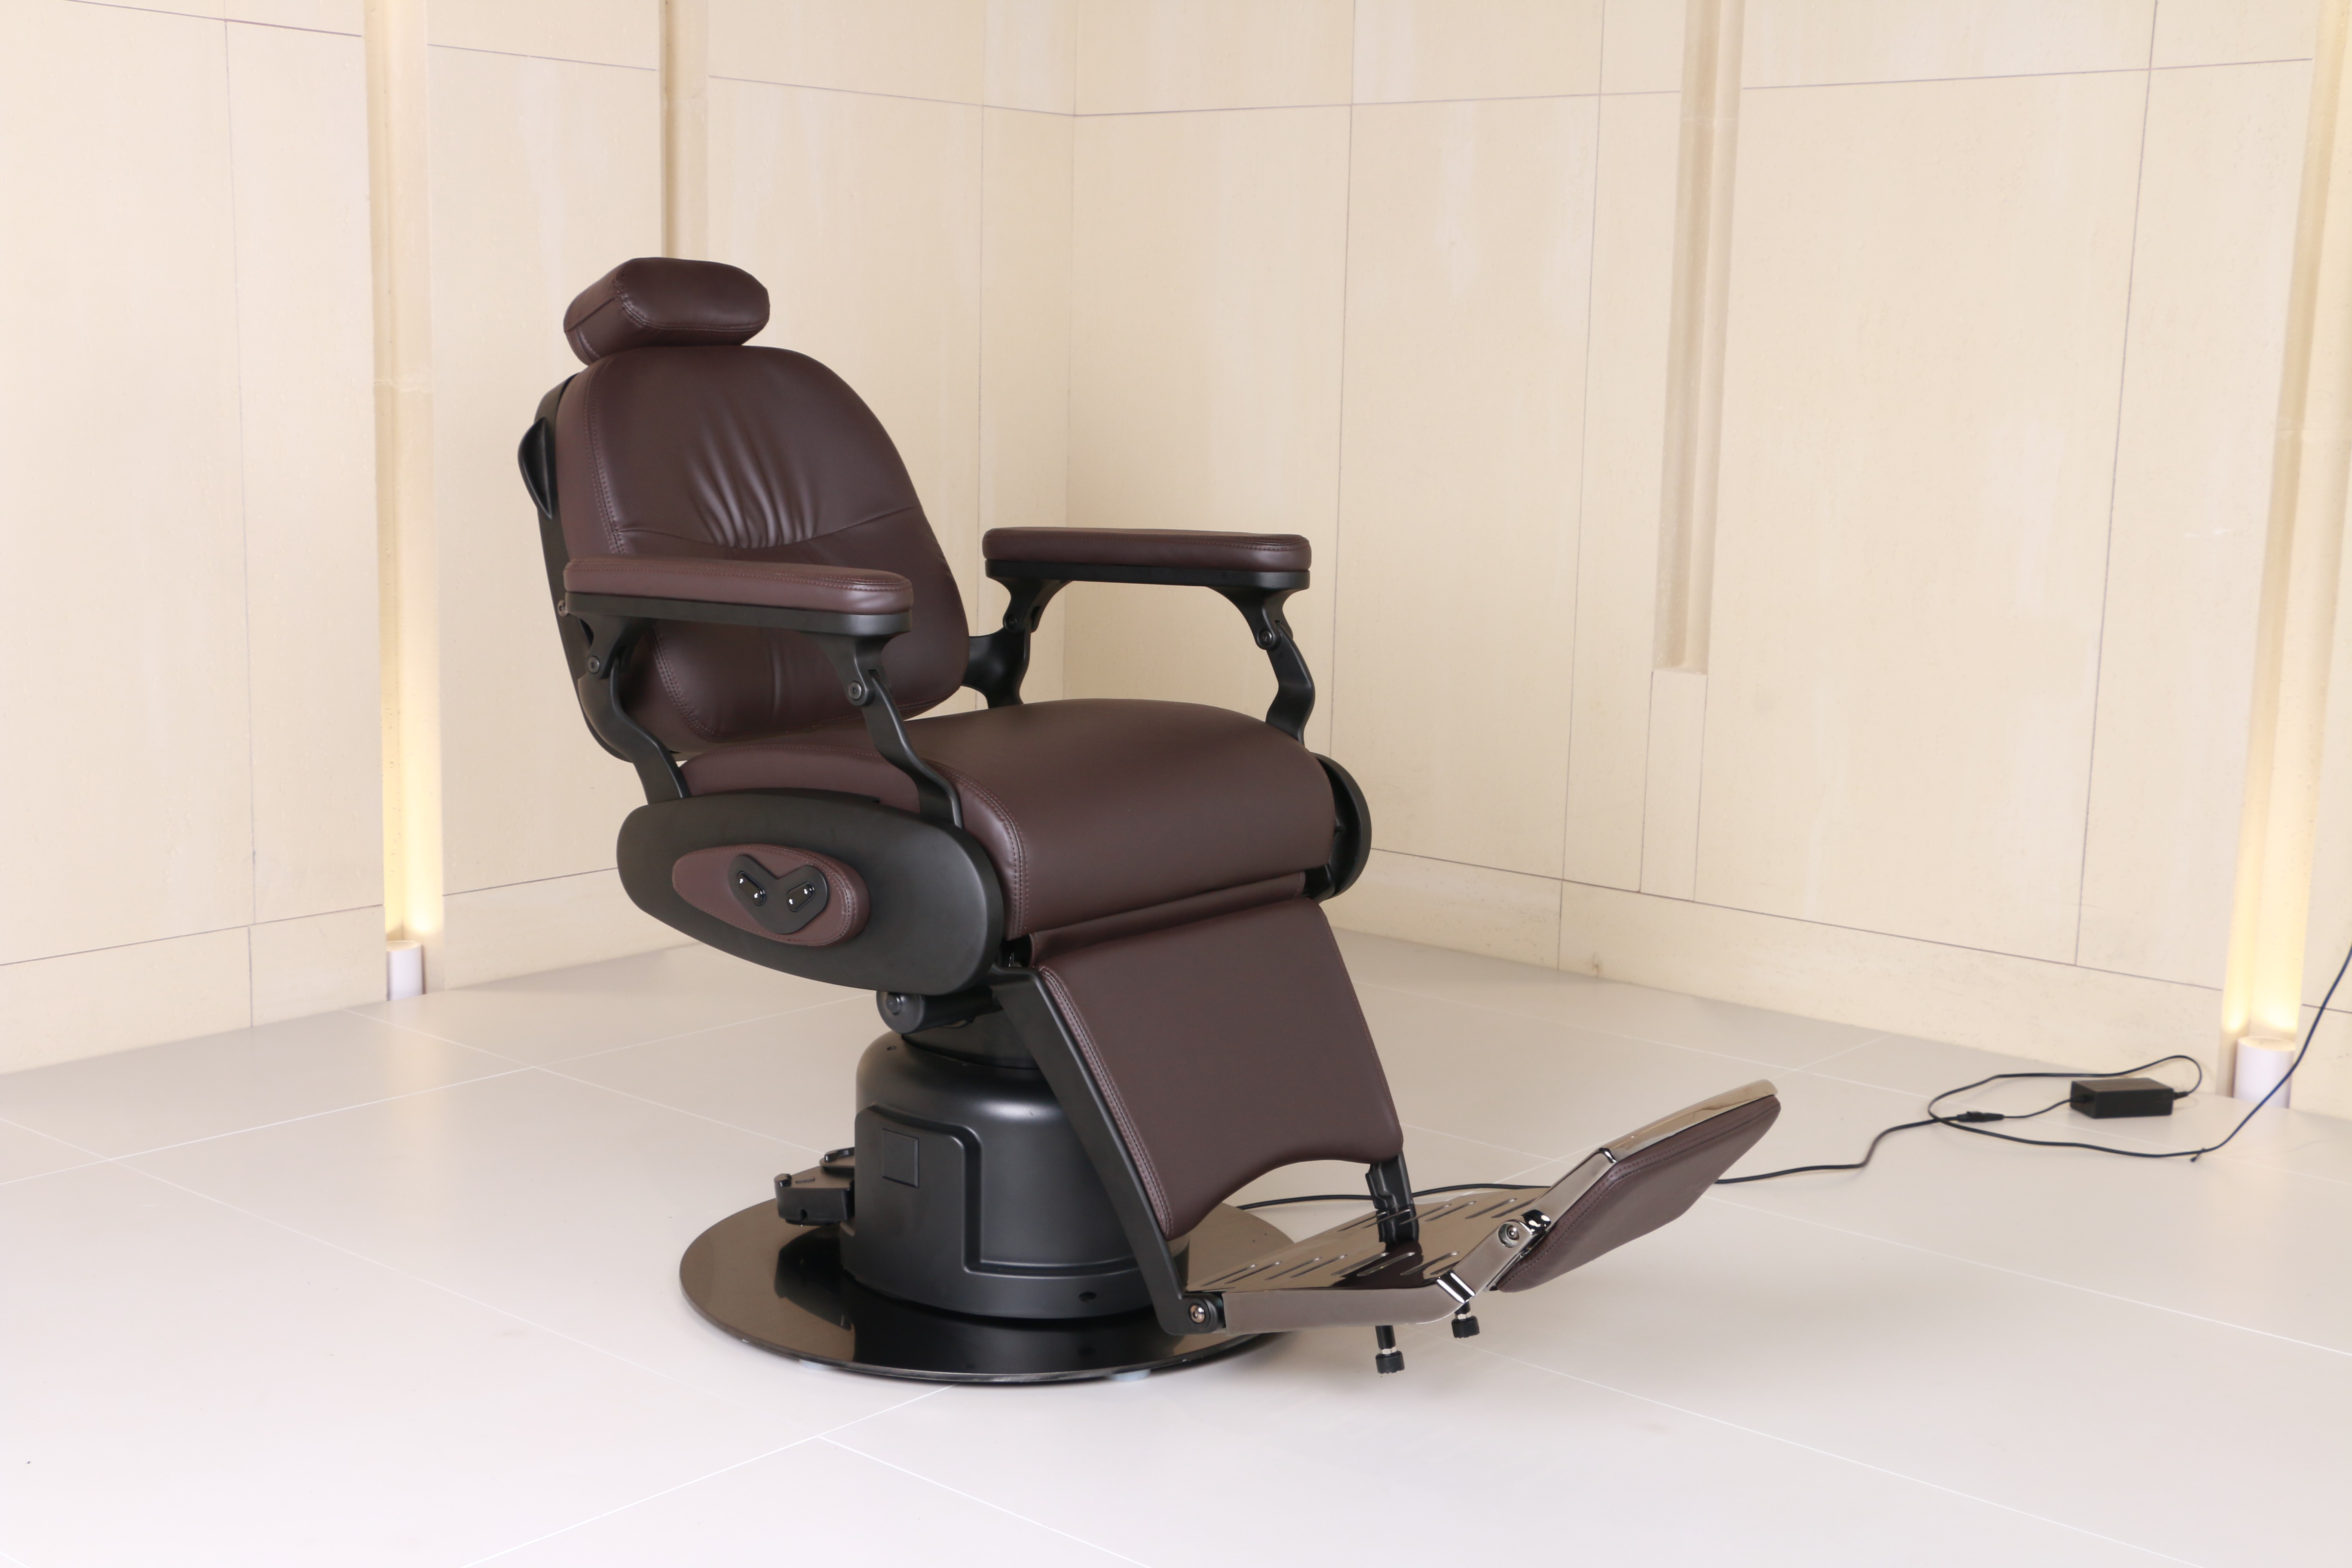 Luxury Swivel Synthetic Leather Hair Salon Furniture Barber Shop Equipment Hydraulic Styling Barber Hair Cut Chair